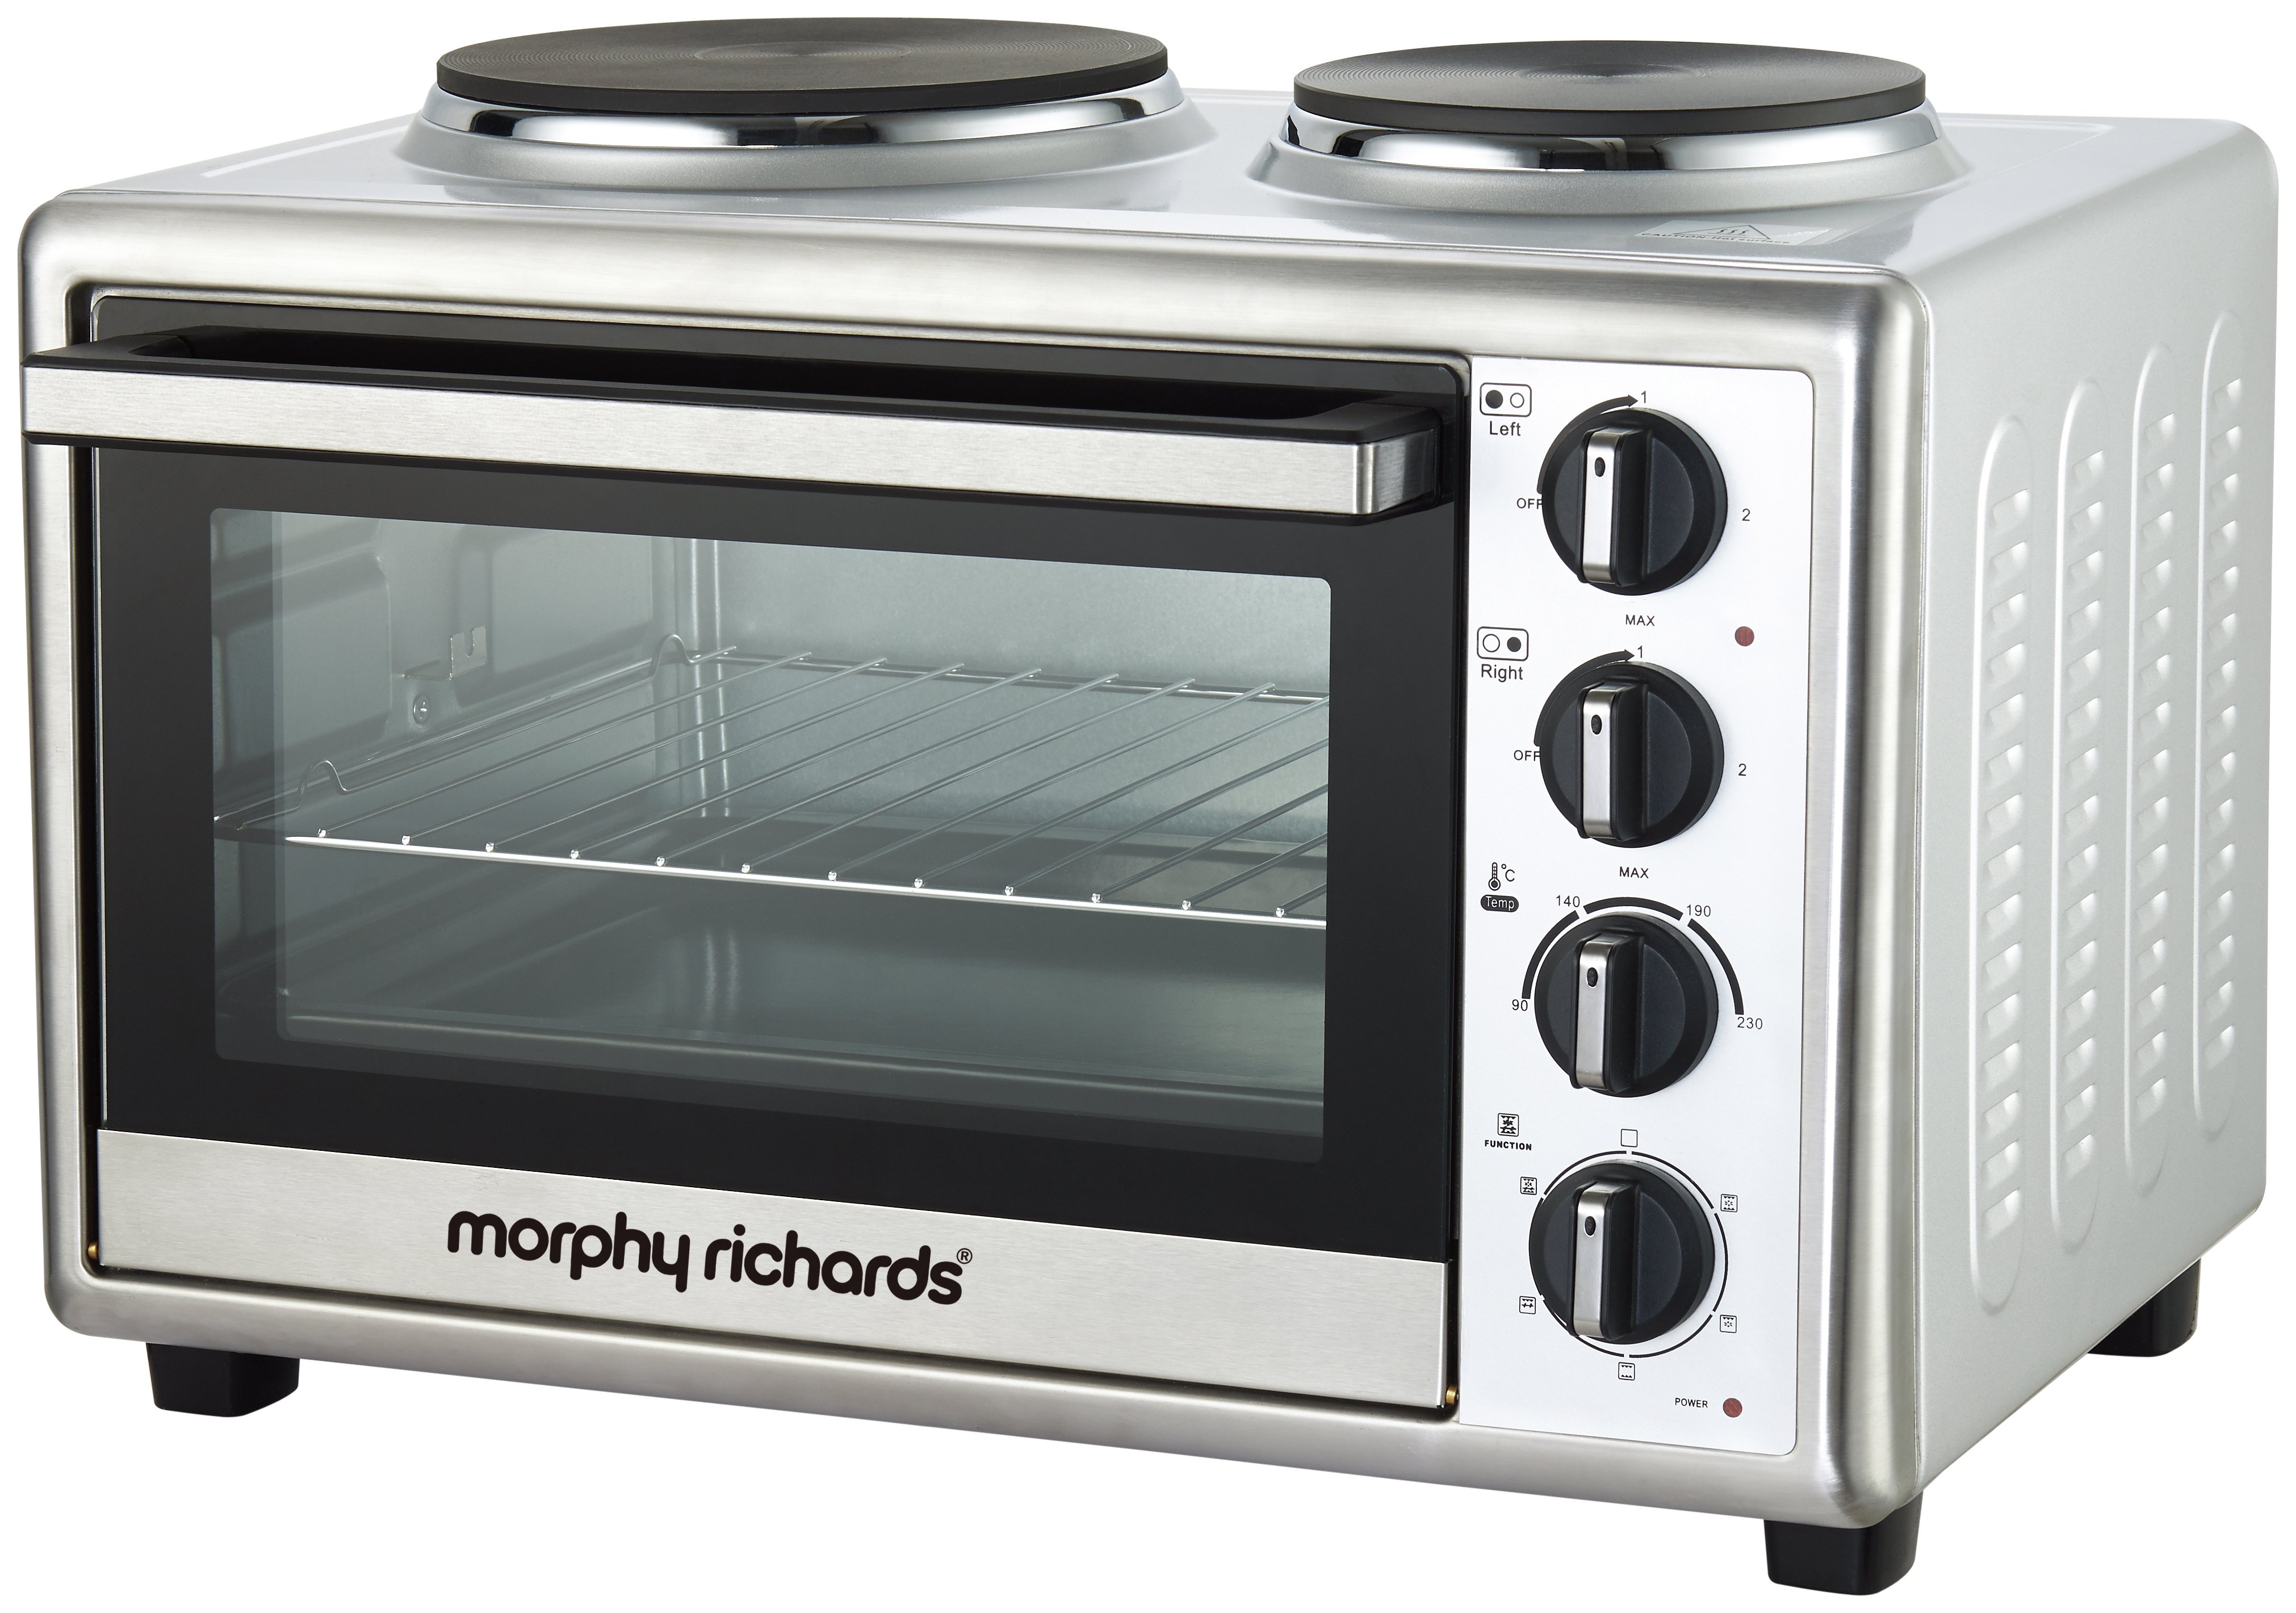 huilen Chaise longue krokodil Morphy Richards Convection Mini Oven with Hob - Silver (4237233) | Argos  Price Tracker | pricehistory.co.uk